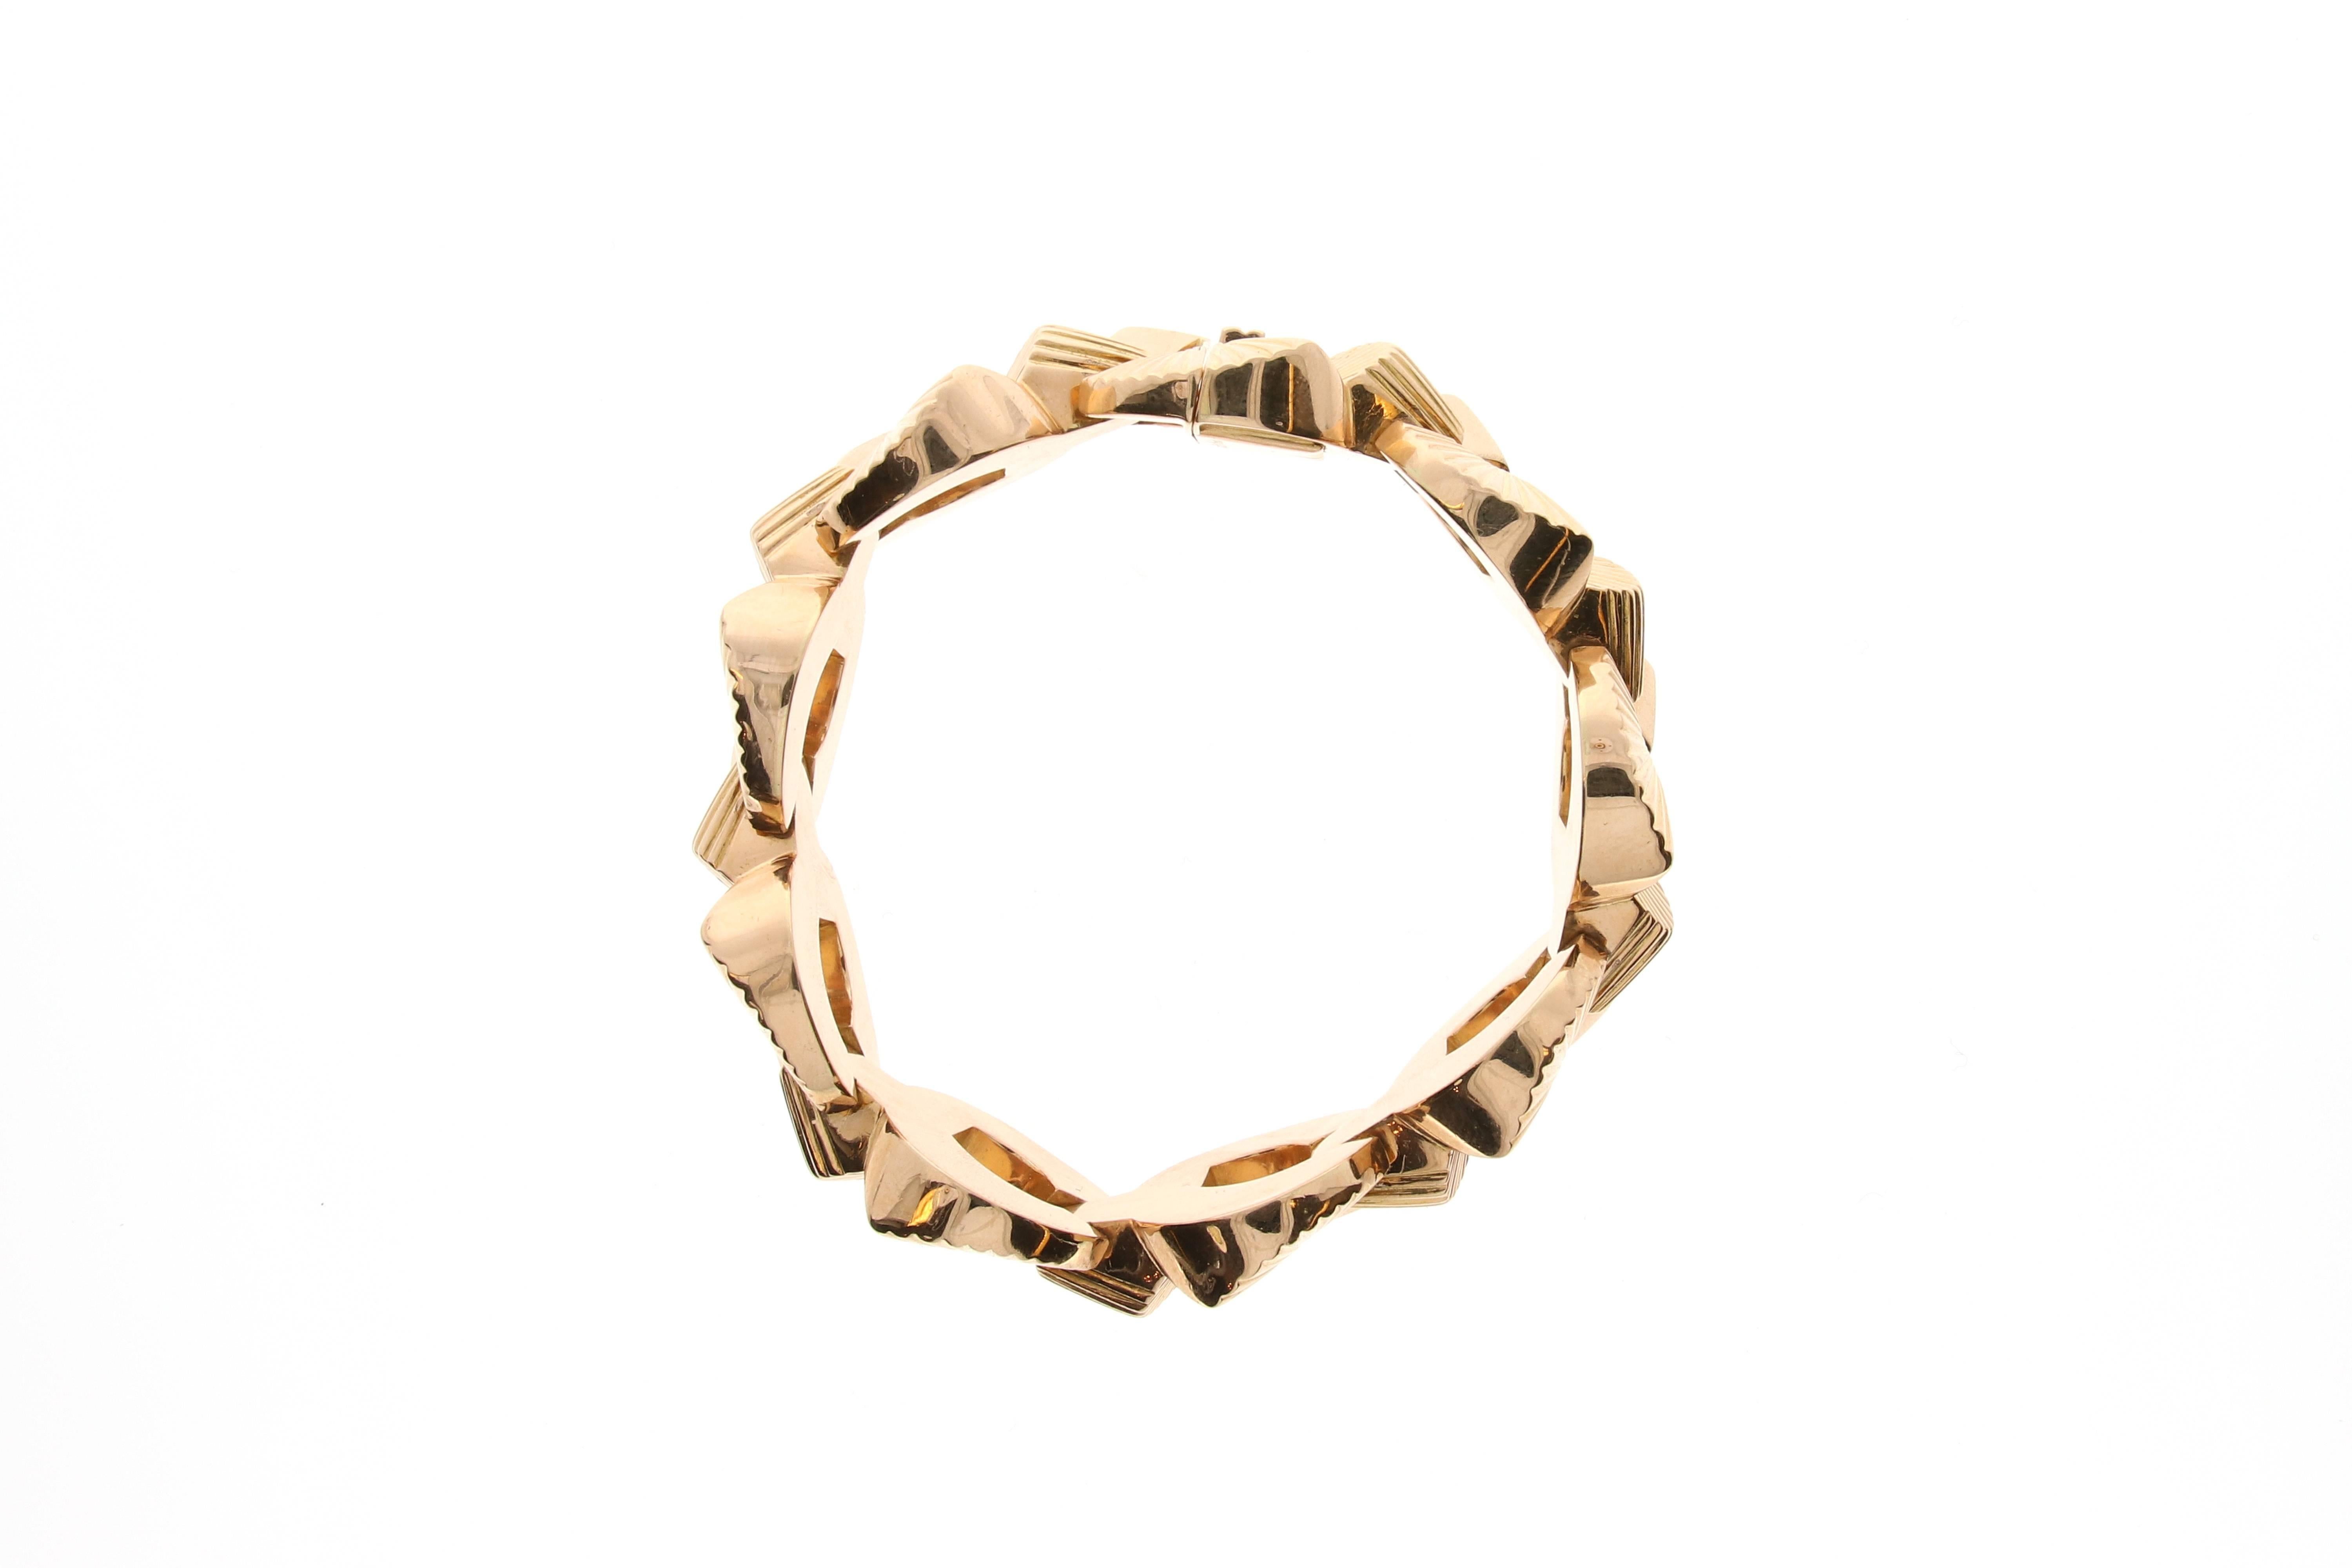 A classy and casual 18 karat yellow gold bracelet, by Cartier.
Designed as a series of textured openwork loops.
Sigend Cariter Paris, French assay marks and makers mark.